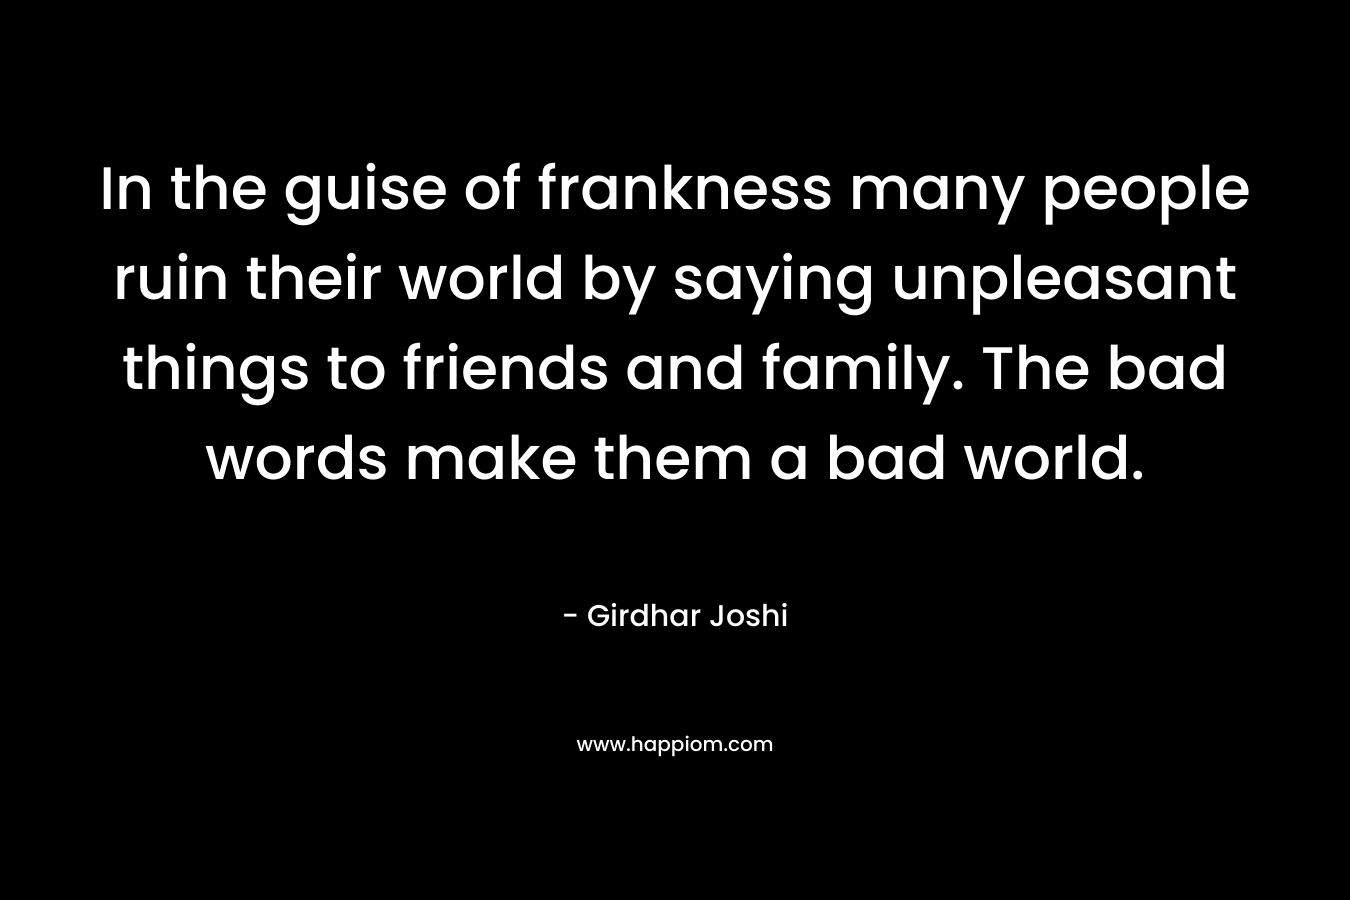 In the guise of frankness many people ruin their world by saying unpleasant things to friends and family. The bad words make them a bad world.